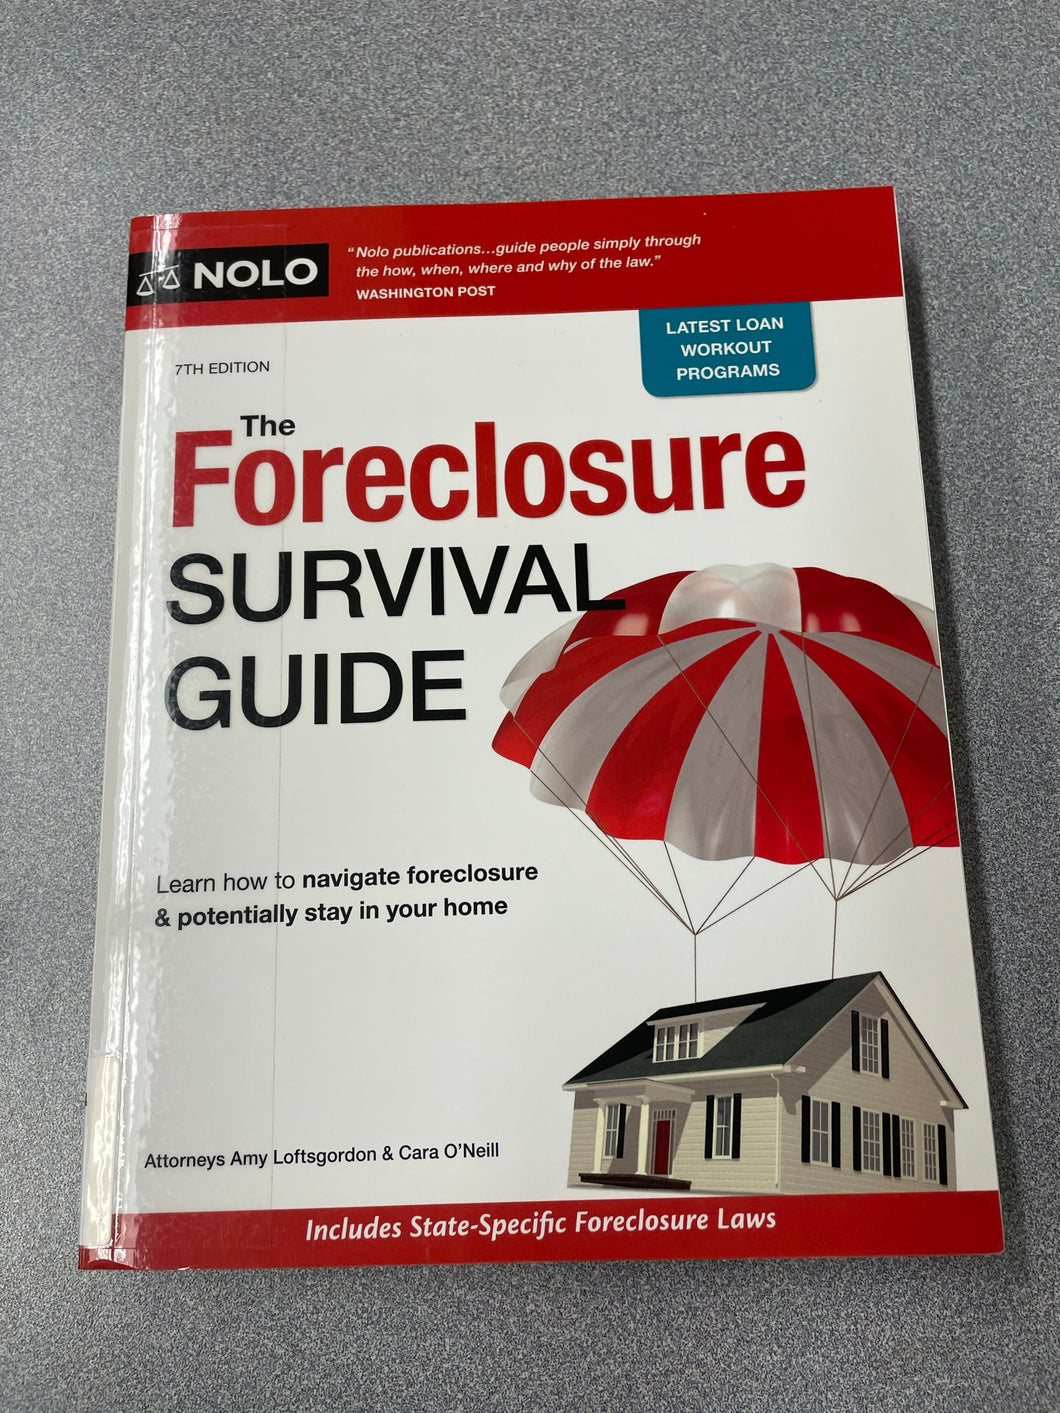 The Foreclosure Survival Guide: Learn How To Navigate Foreclosure and Potentially Stay in Your Home, Loftsgordon, Amy and Cara O'Neill [2019] LAW 10/22